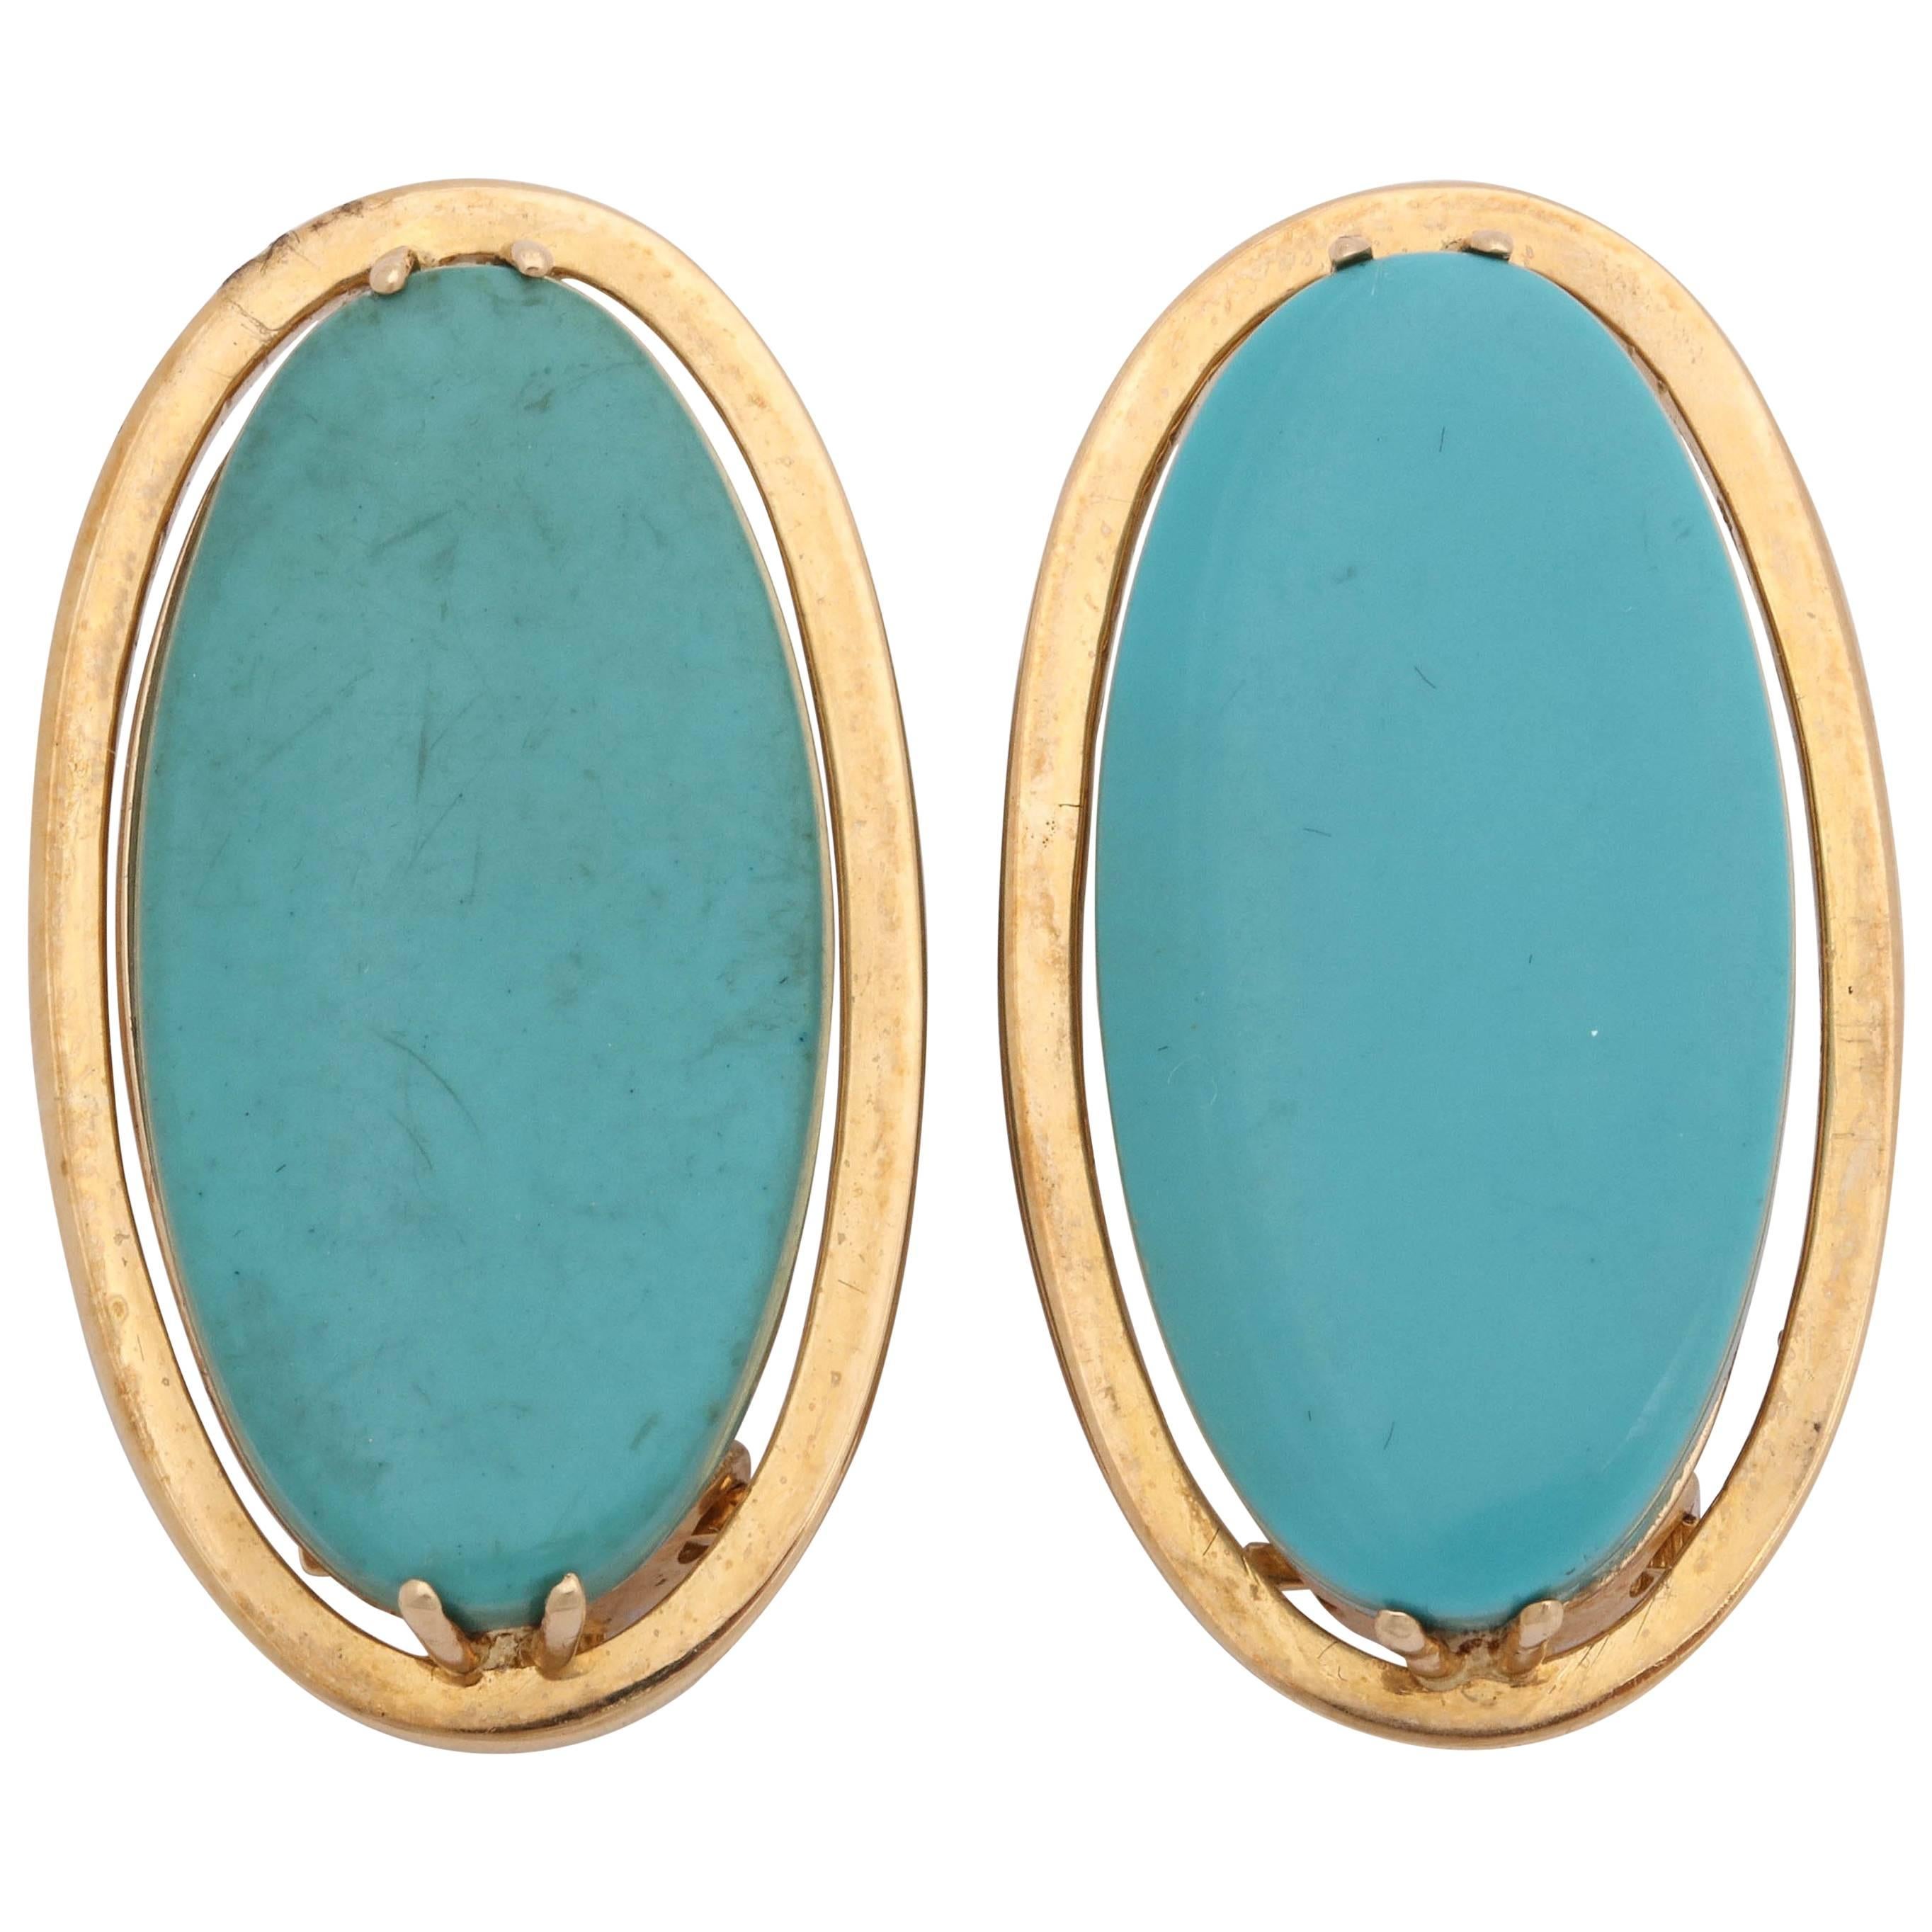 1960s Chic Large Sleeping Beauty Turquoise and Gold Oval Fancy Earclips